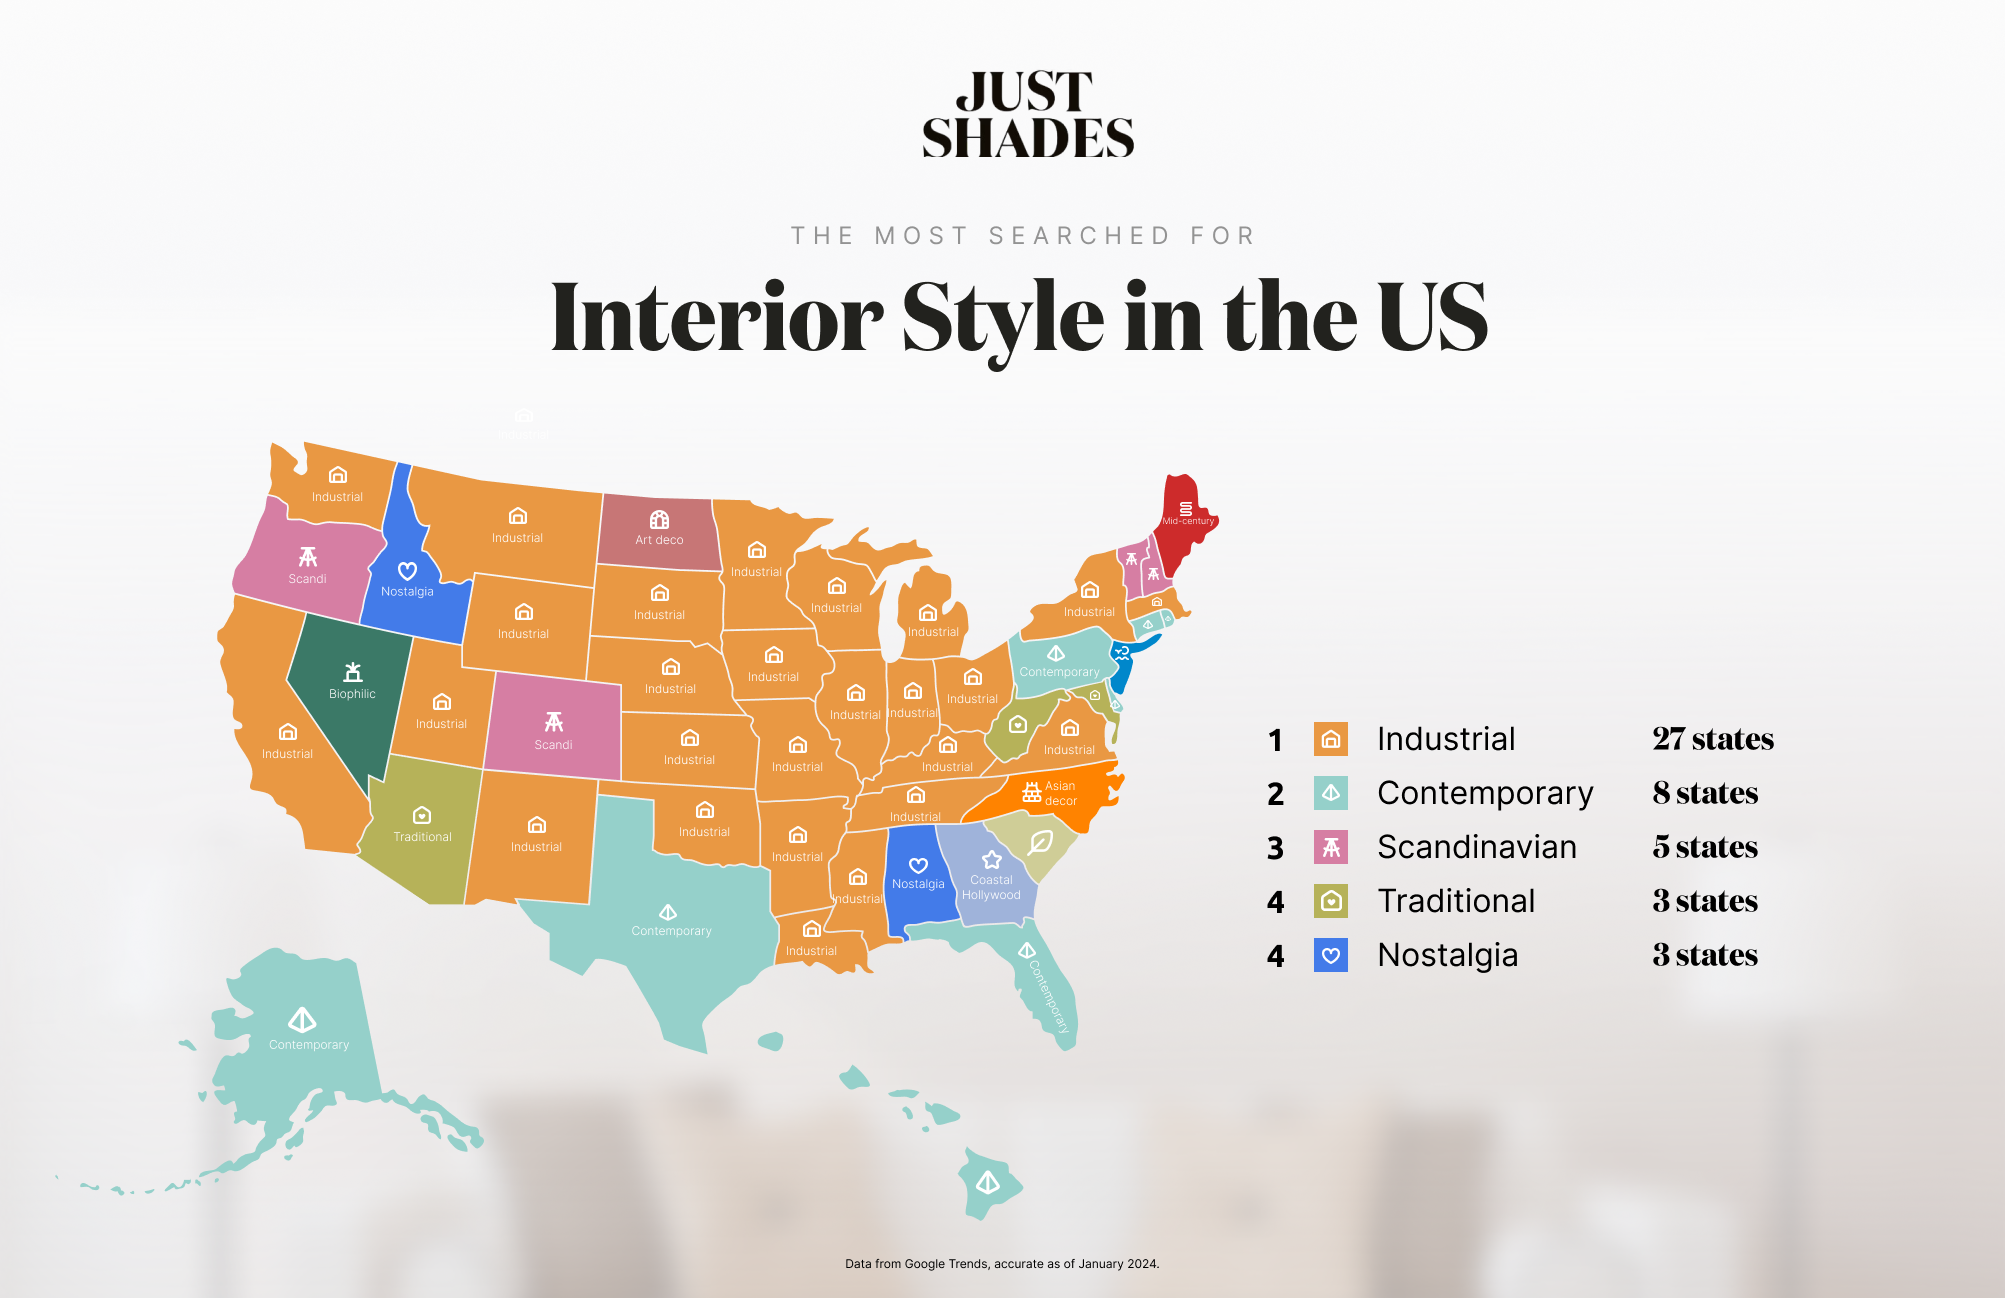 ‘Industrial’ revealed as the most-loved interior style in the US